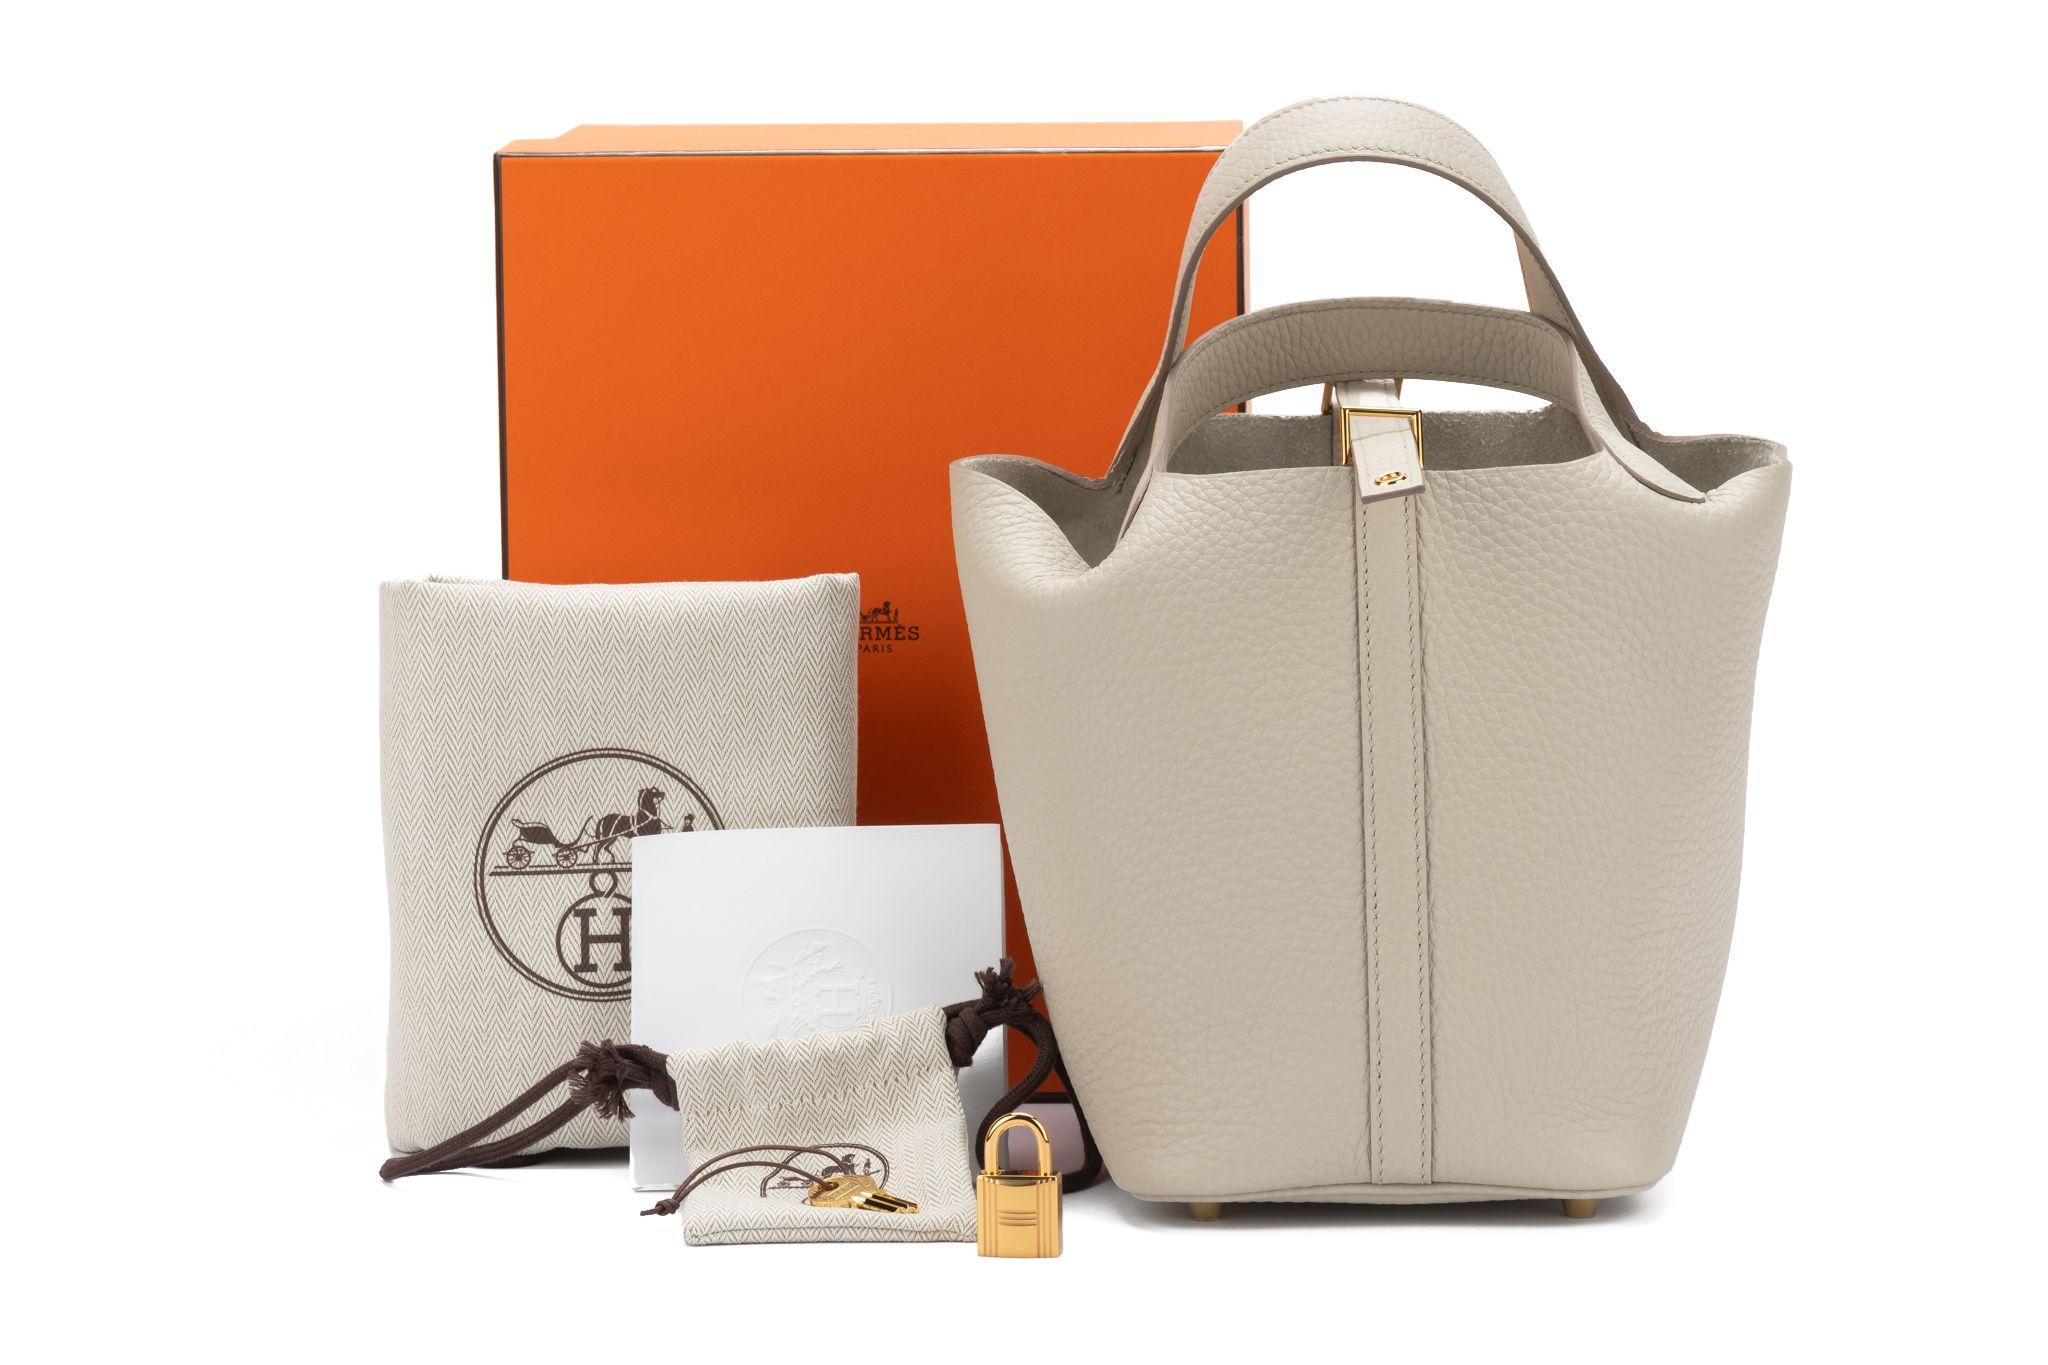 Hermès Picotin Lock bag in clemence leather and the color beton. The Hardware is gold. The bag is brand new and comes with the lock, original dustcover, booklet and box.